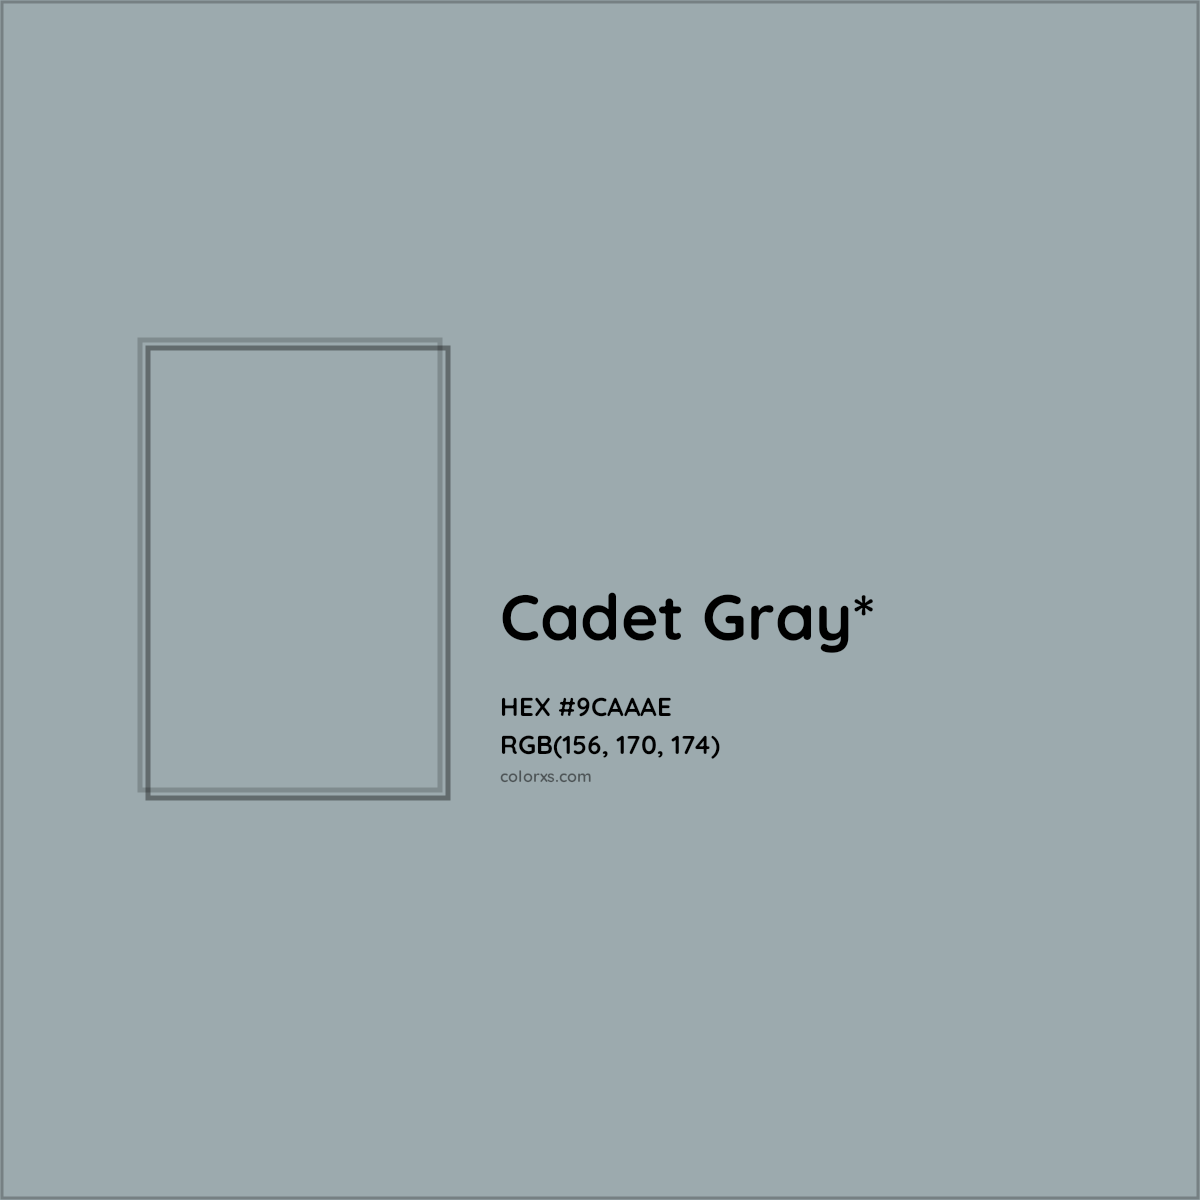 HEX #9CAAAE Color Name, Color Code, Palettes, Similar Paints, Images